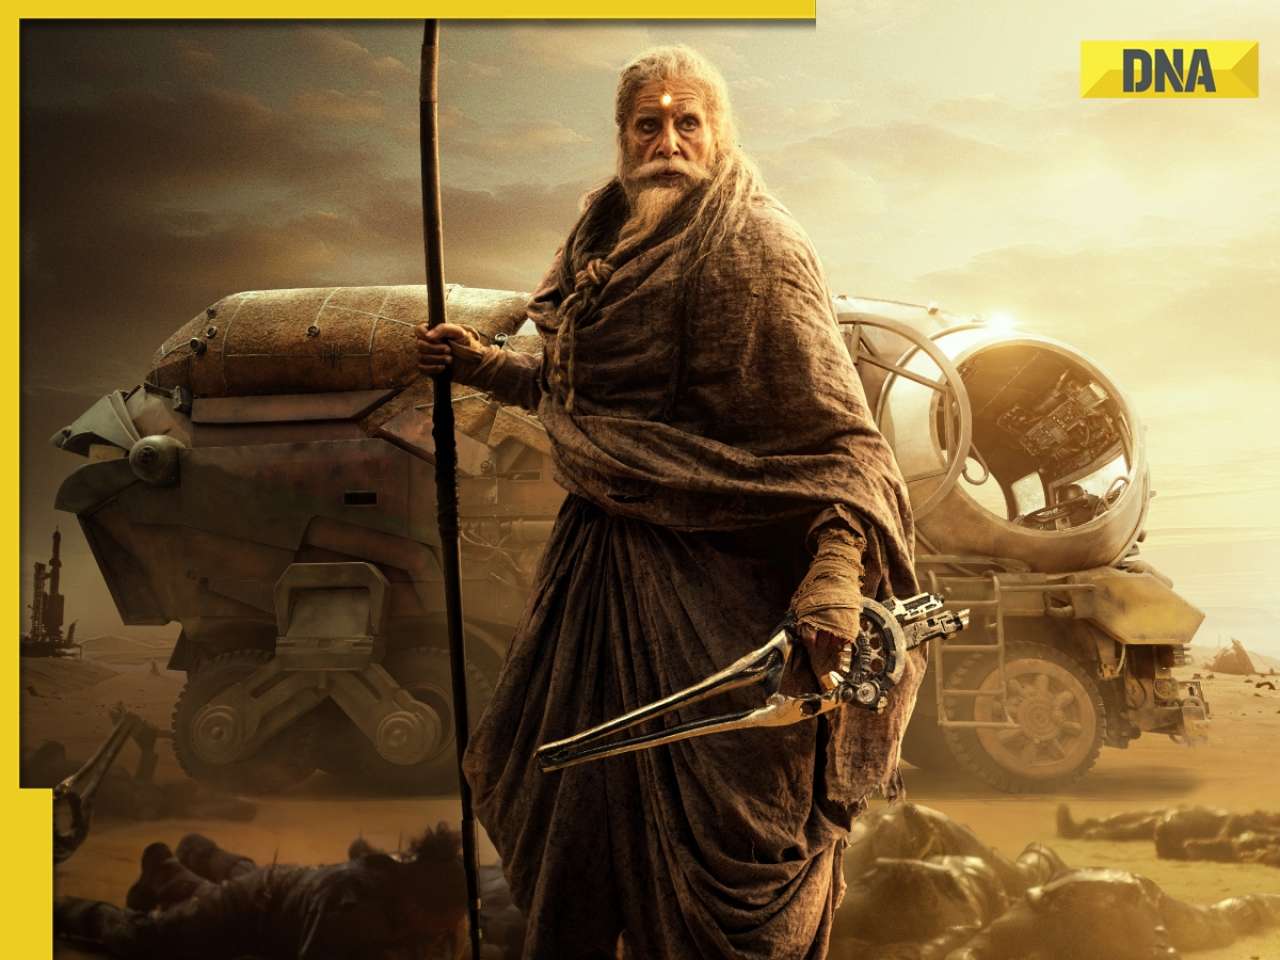 Amitabh Bachchan looks fierce as Ashwatthama in new poster from Kalki 2898 AD, fans say 'RIP Hollywood'